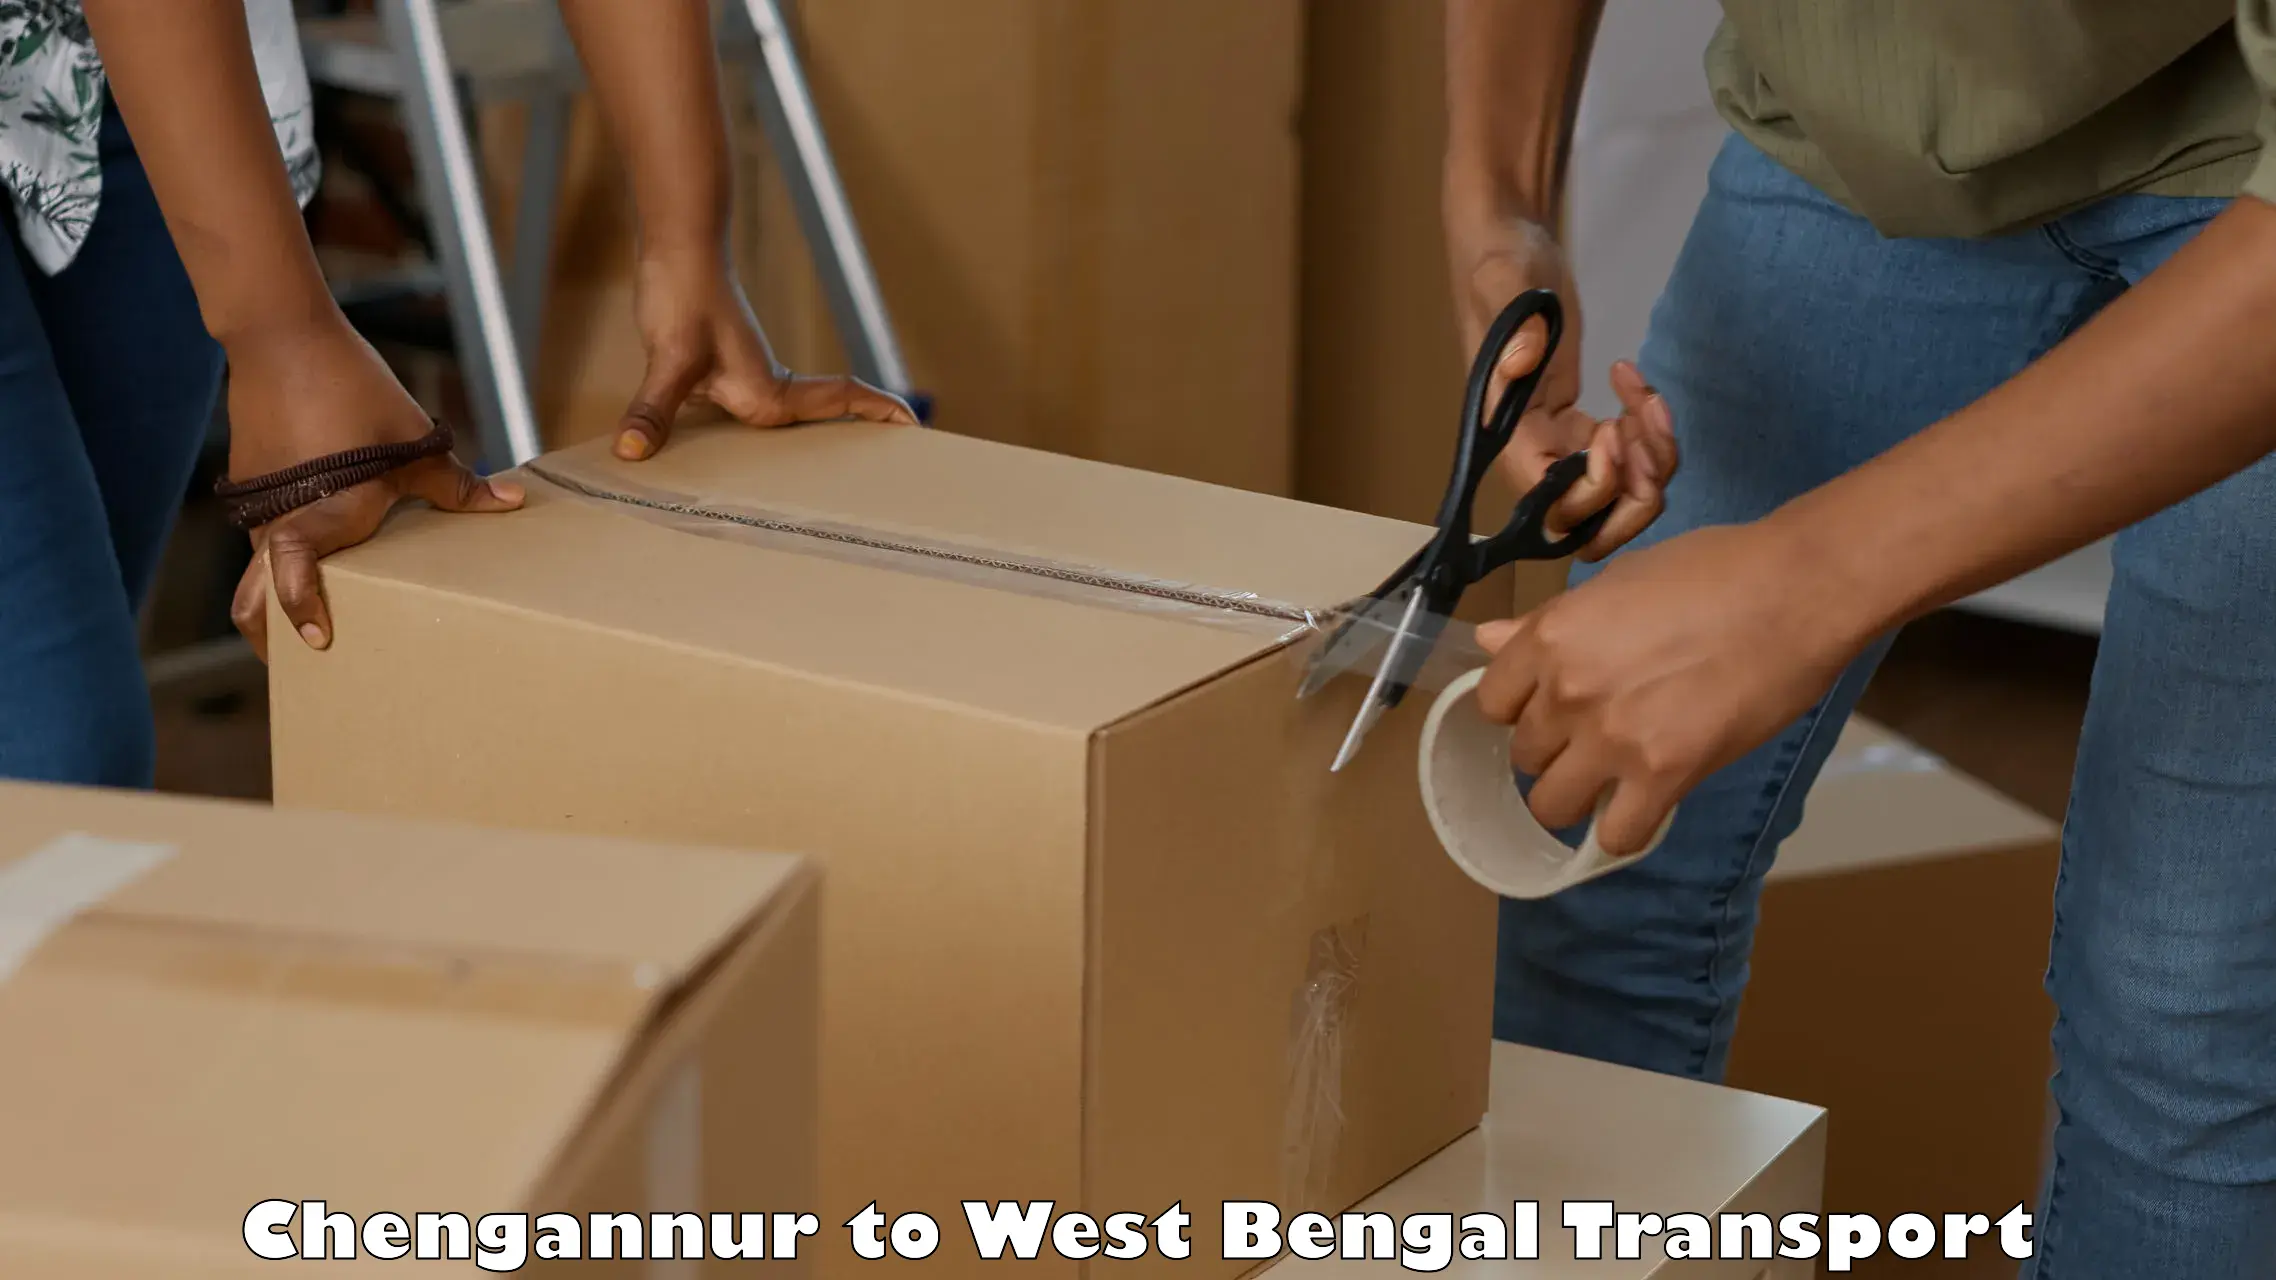 Truck transport companies in India Chengannur to North 24 Parganas